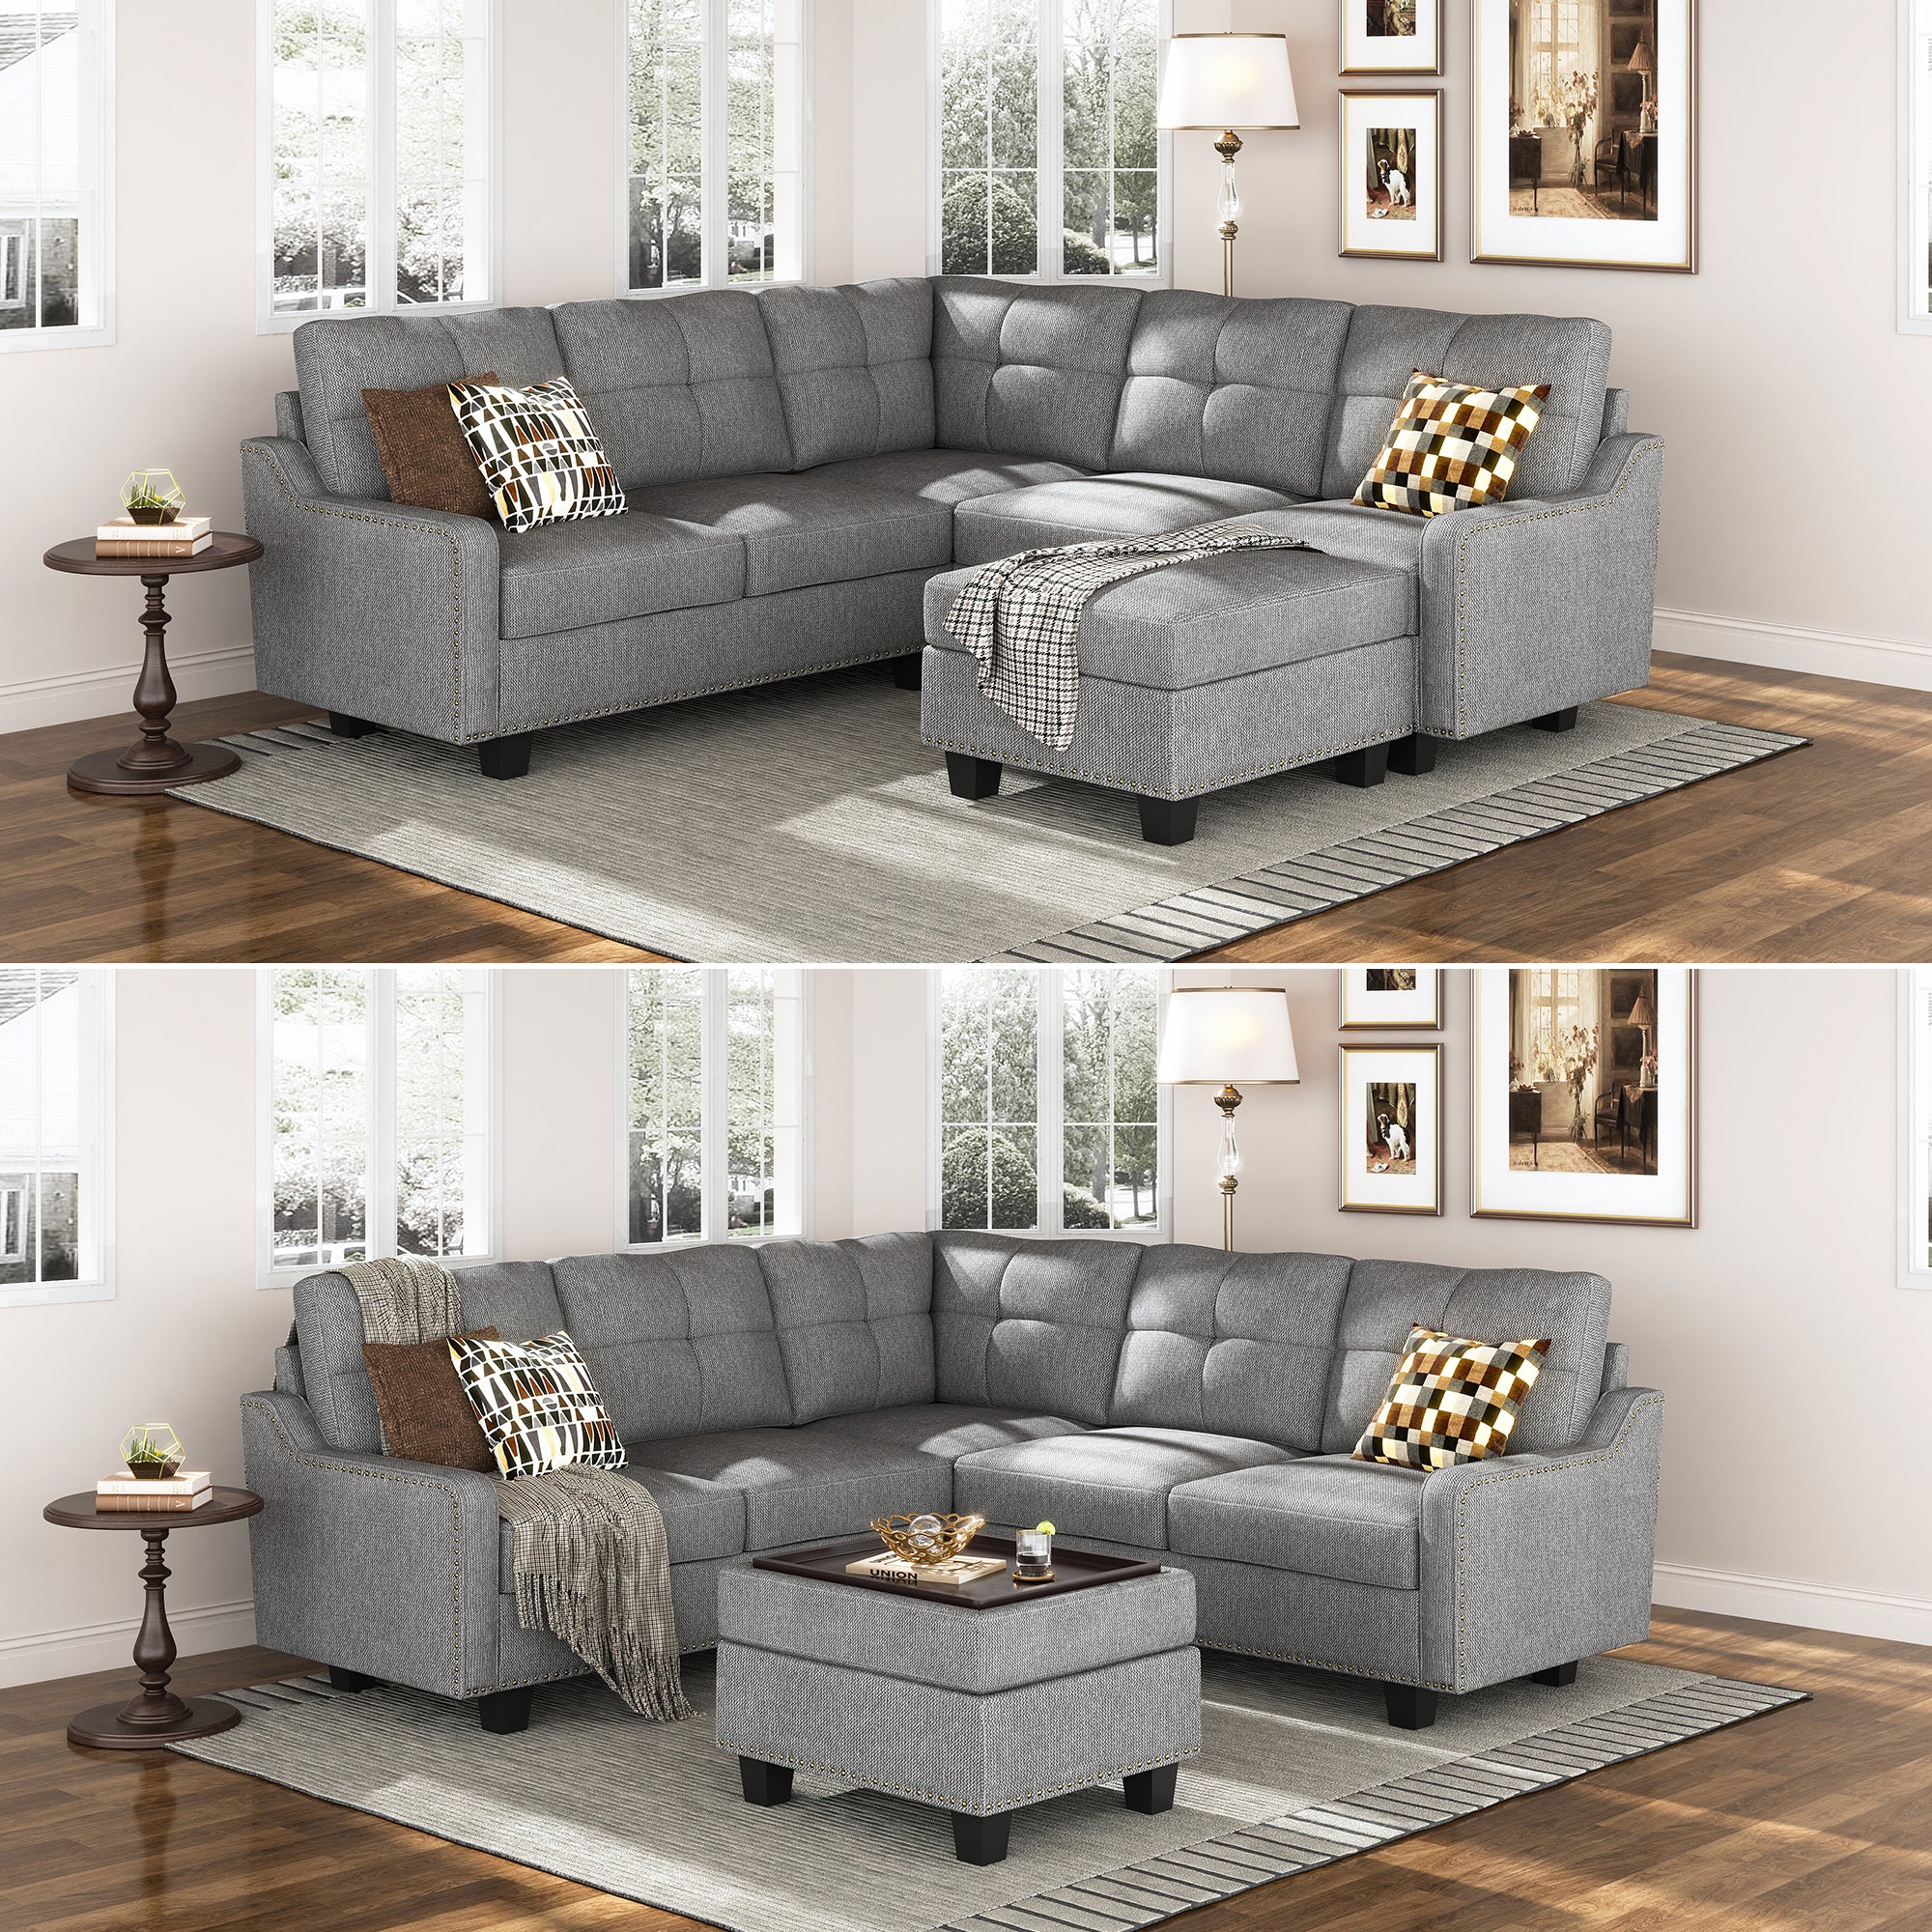 HONBAY Polyester Sectional Corner Sofa with Reversible Lid Ottoman 